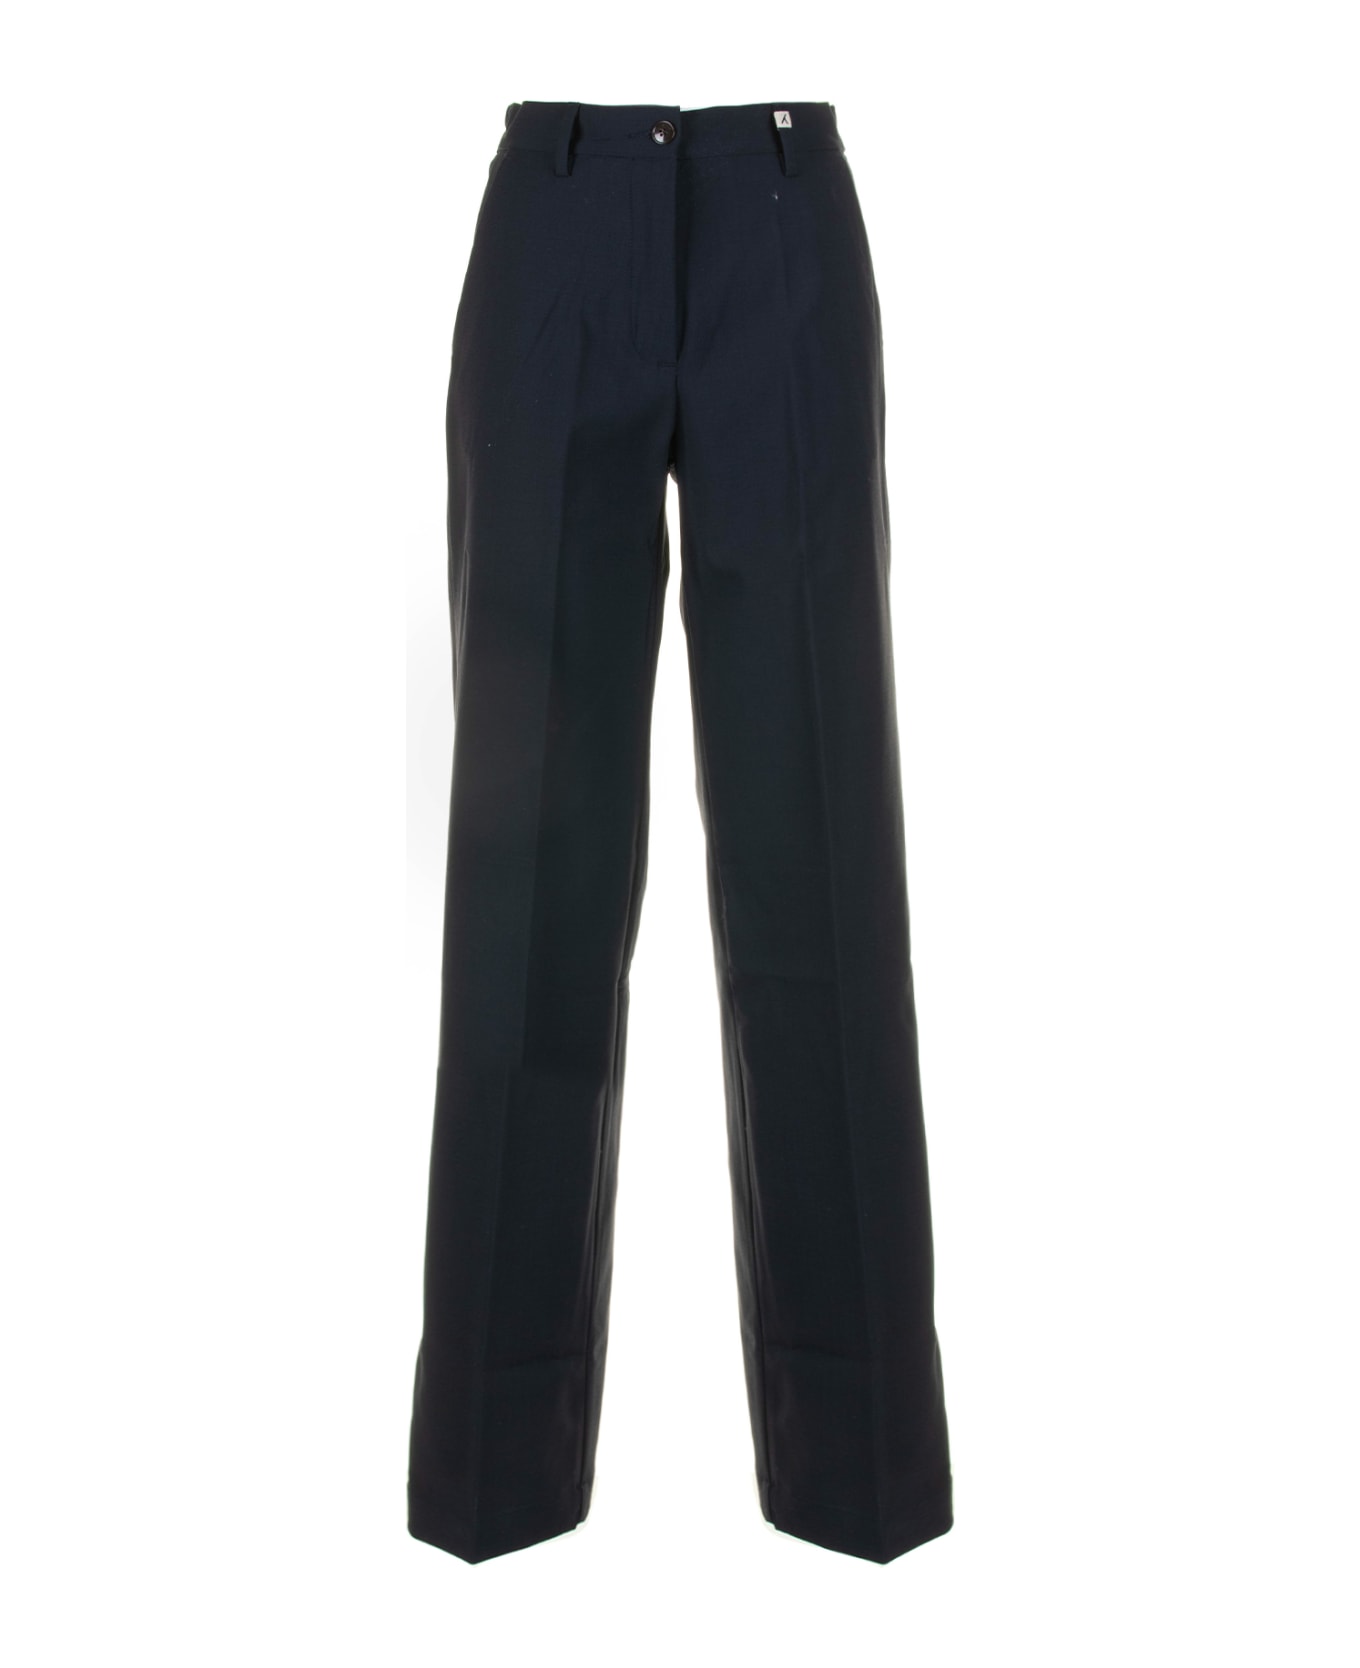 Myths Navy Blue High-waisted Trousers - BLU NAVY ボトムス